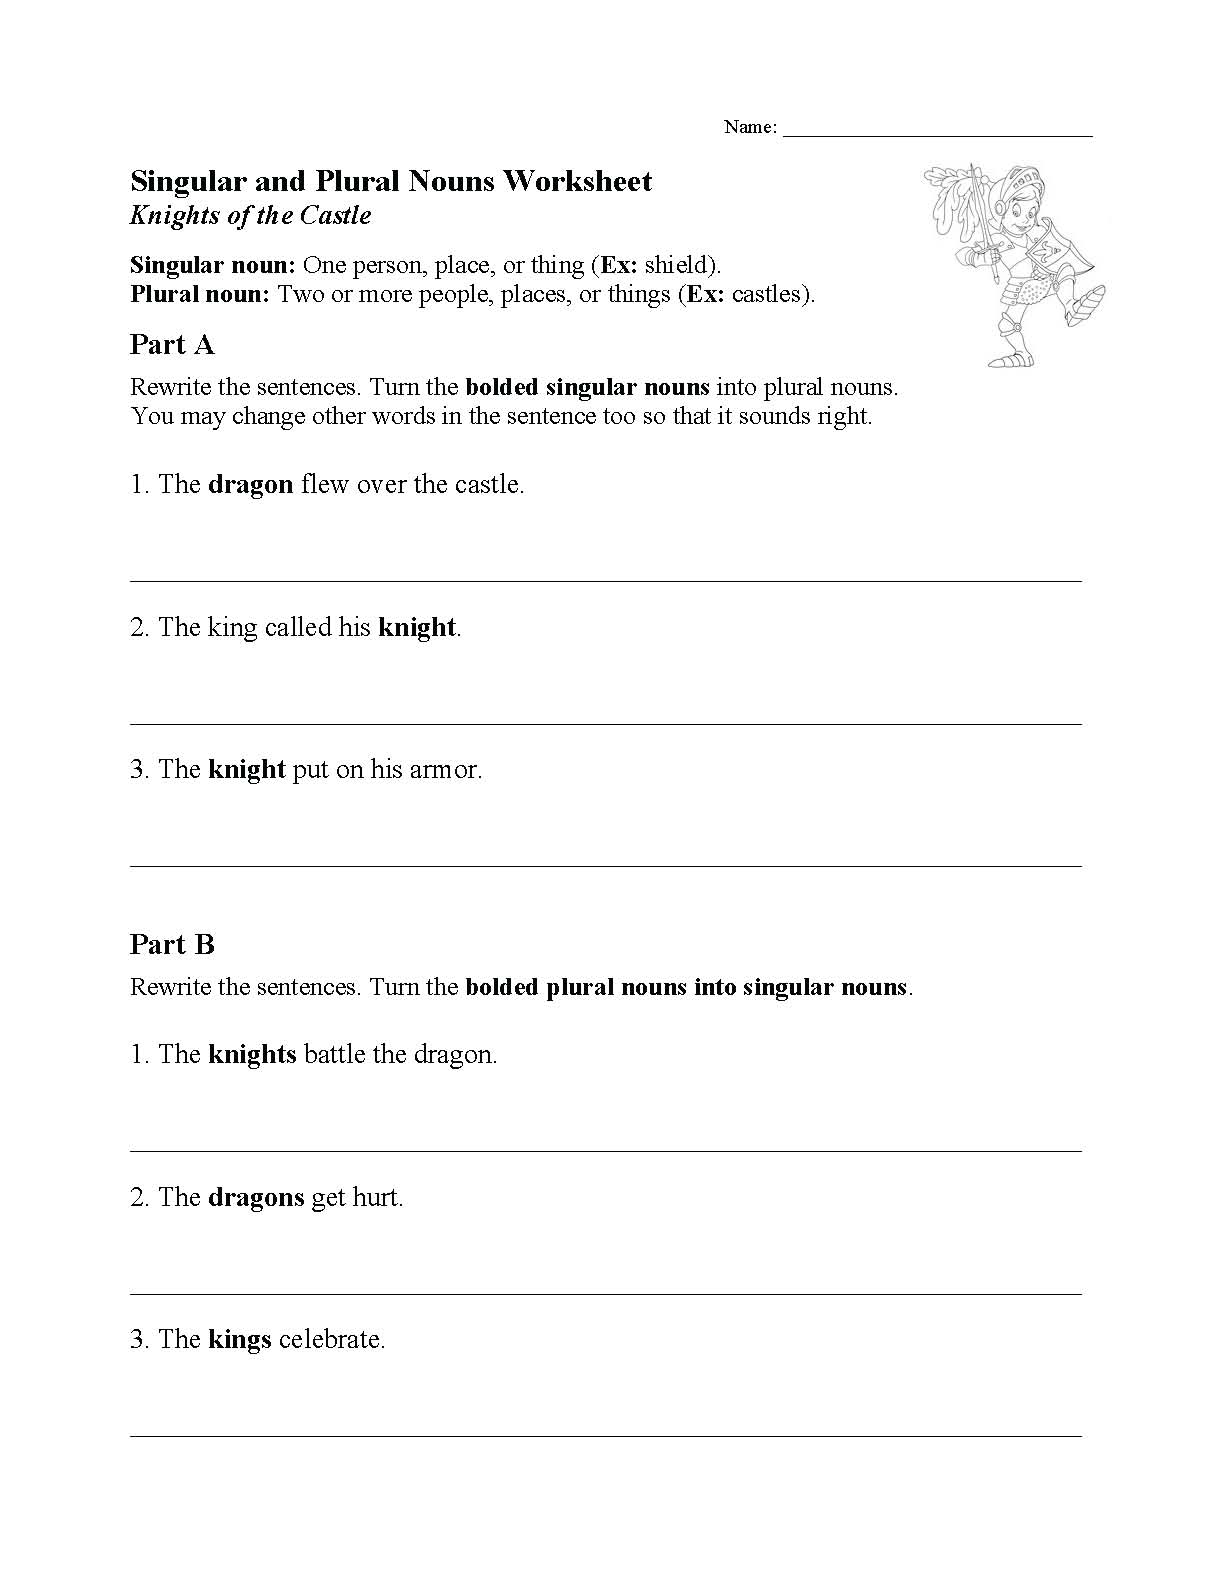 This is a preview image of one of our Noun Worksheets. Click on it to view all of our noun worksheets.